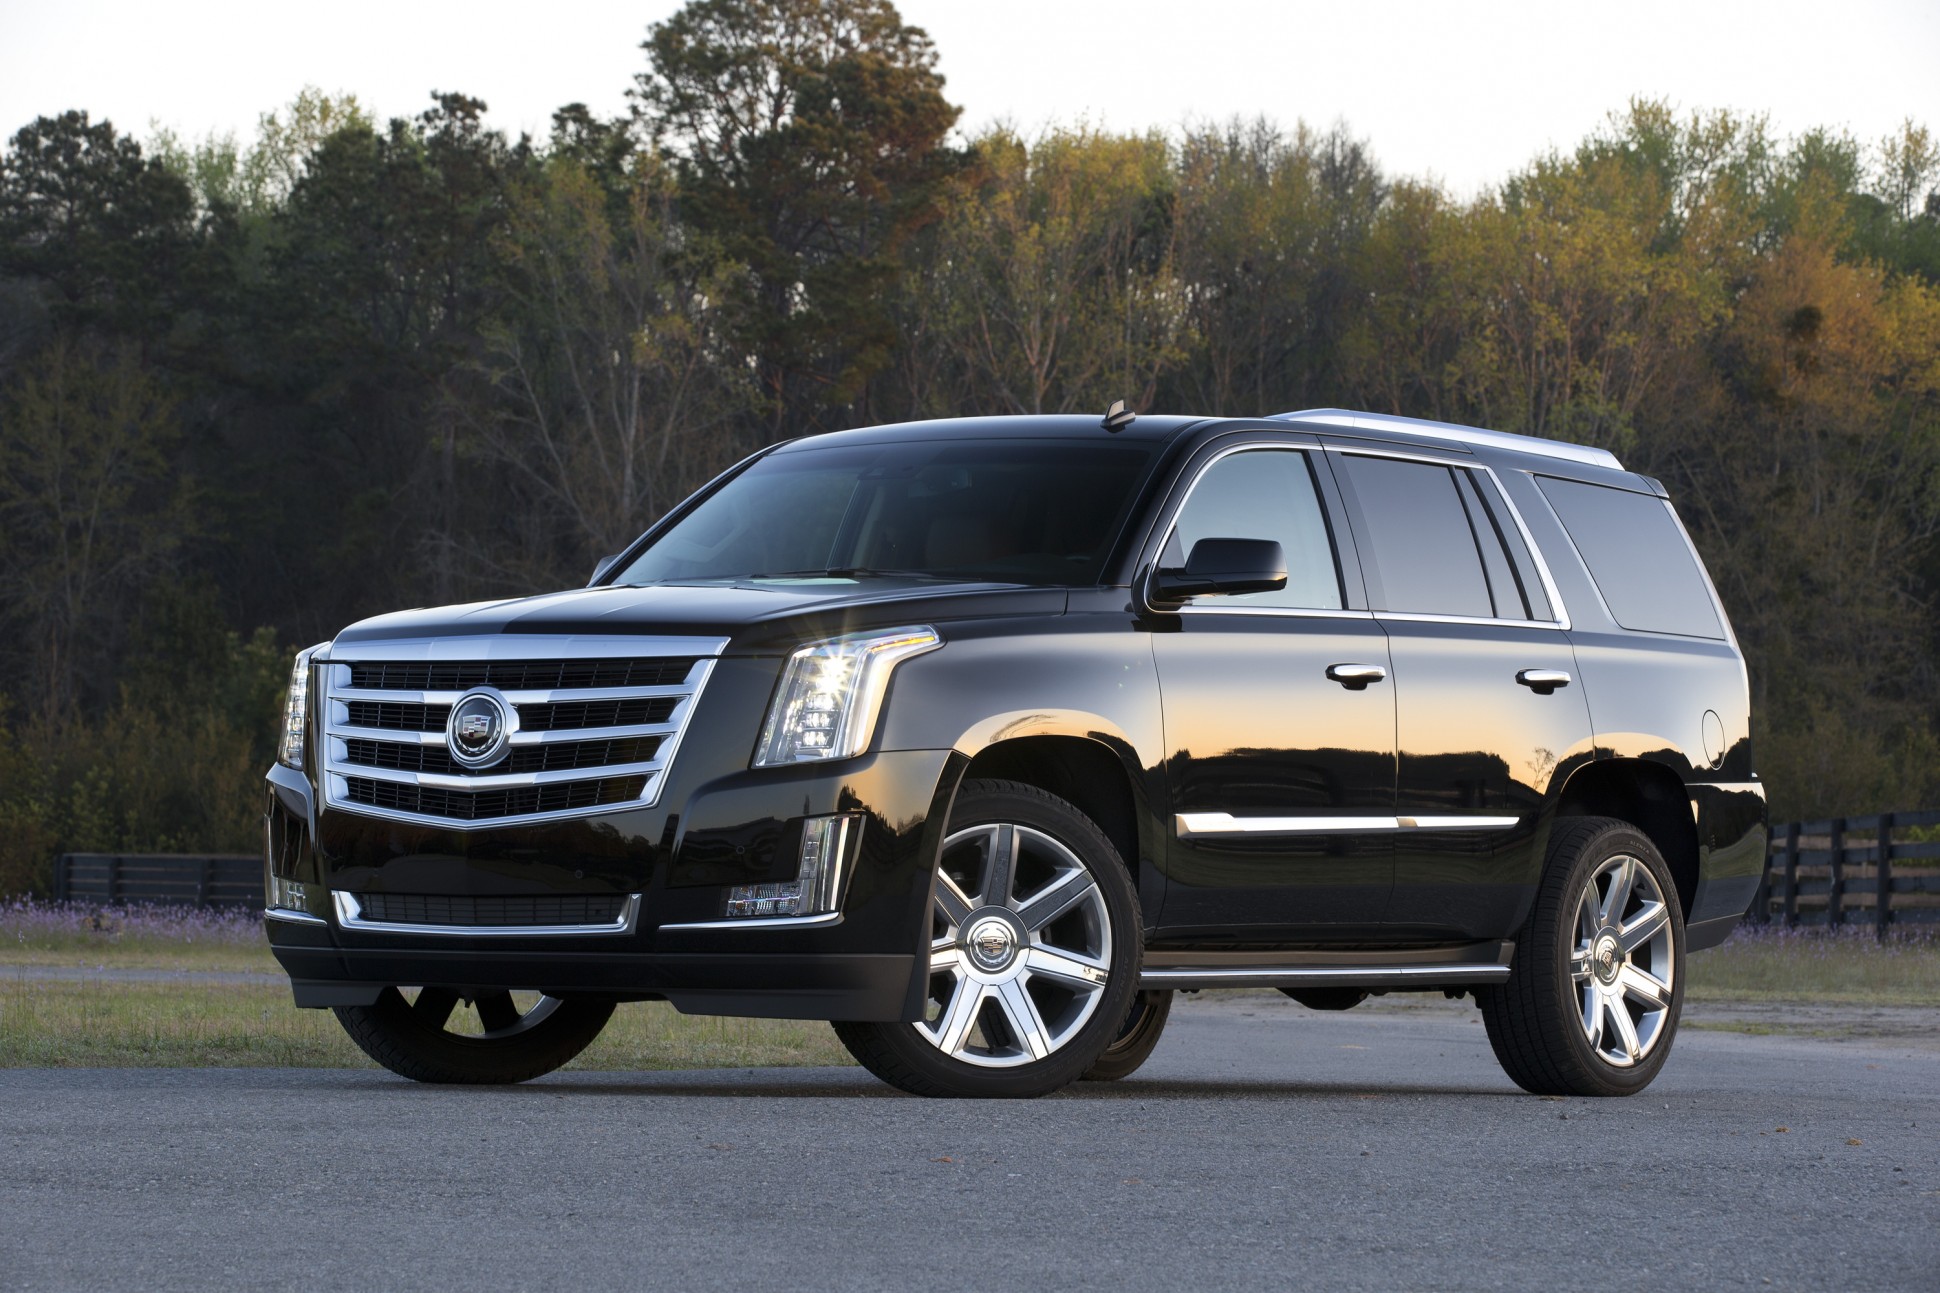 With Hot Escalade, Cadillac Loves To Leave Well Enough Alone